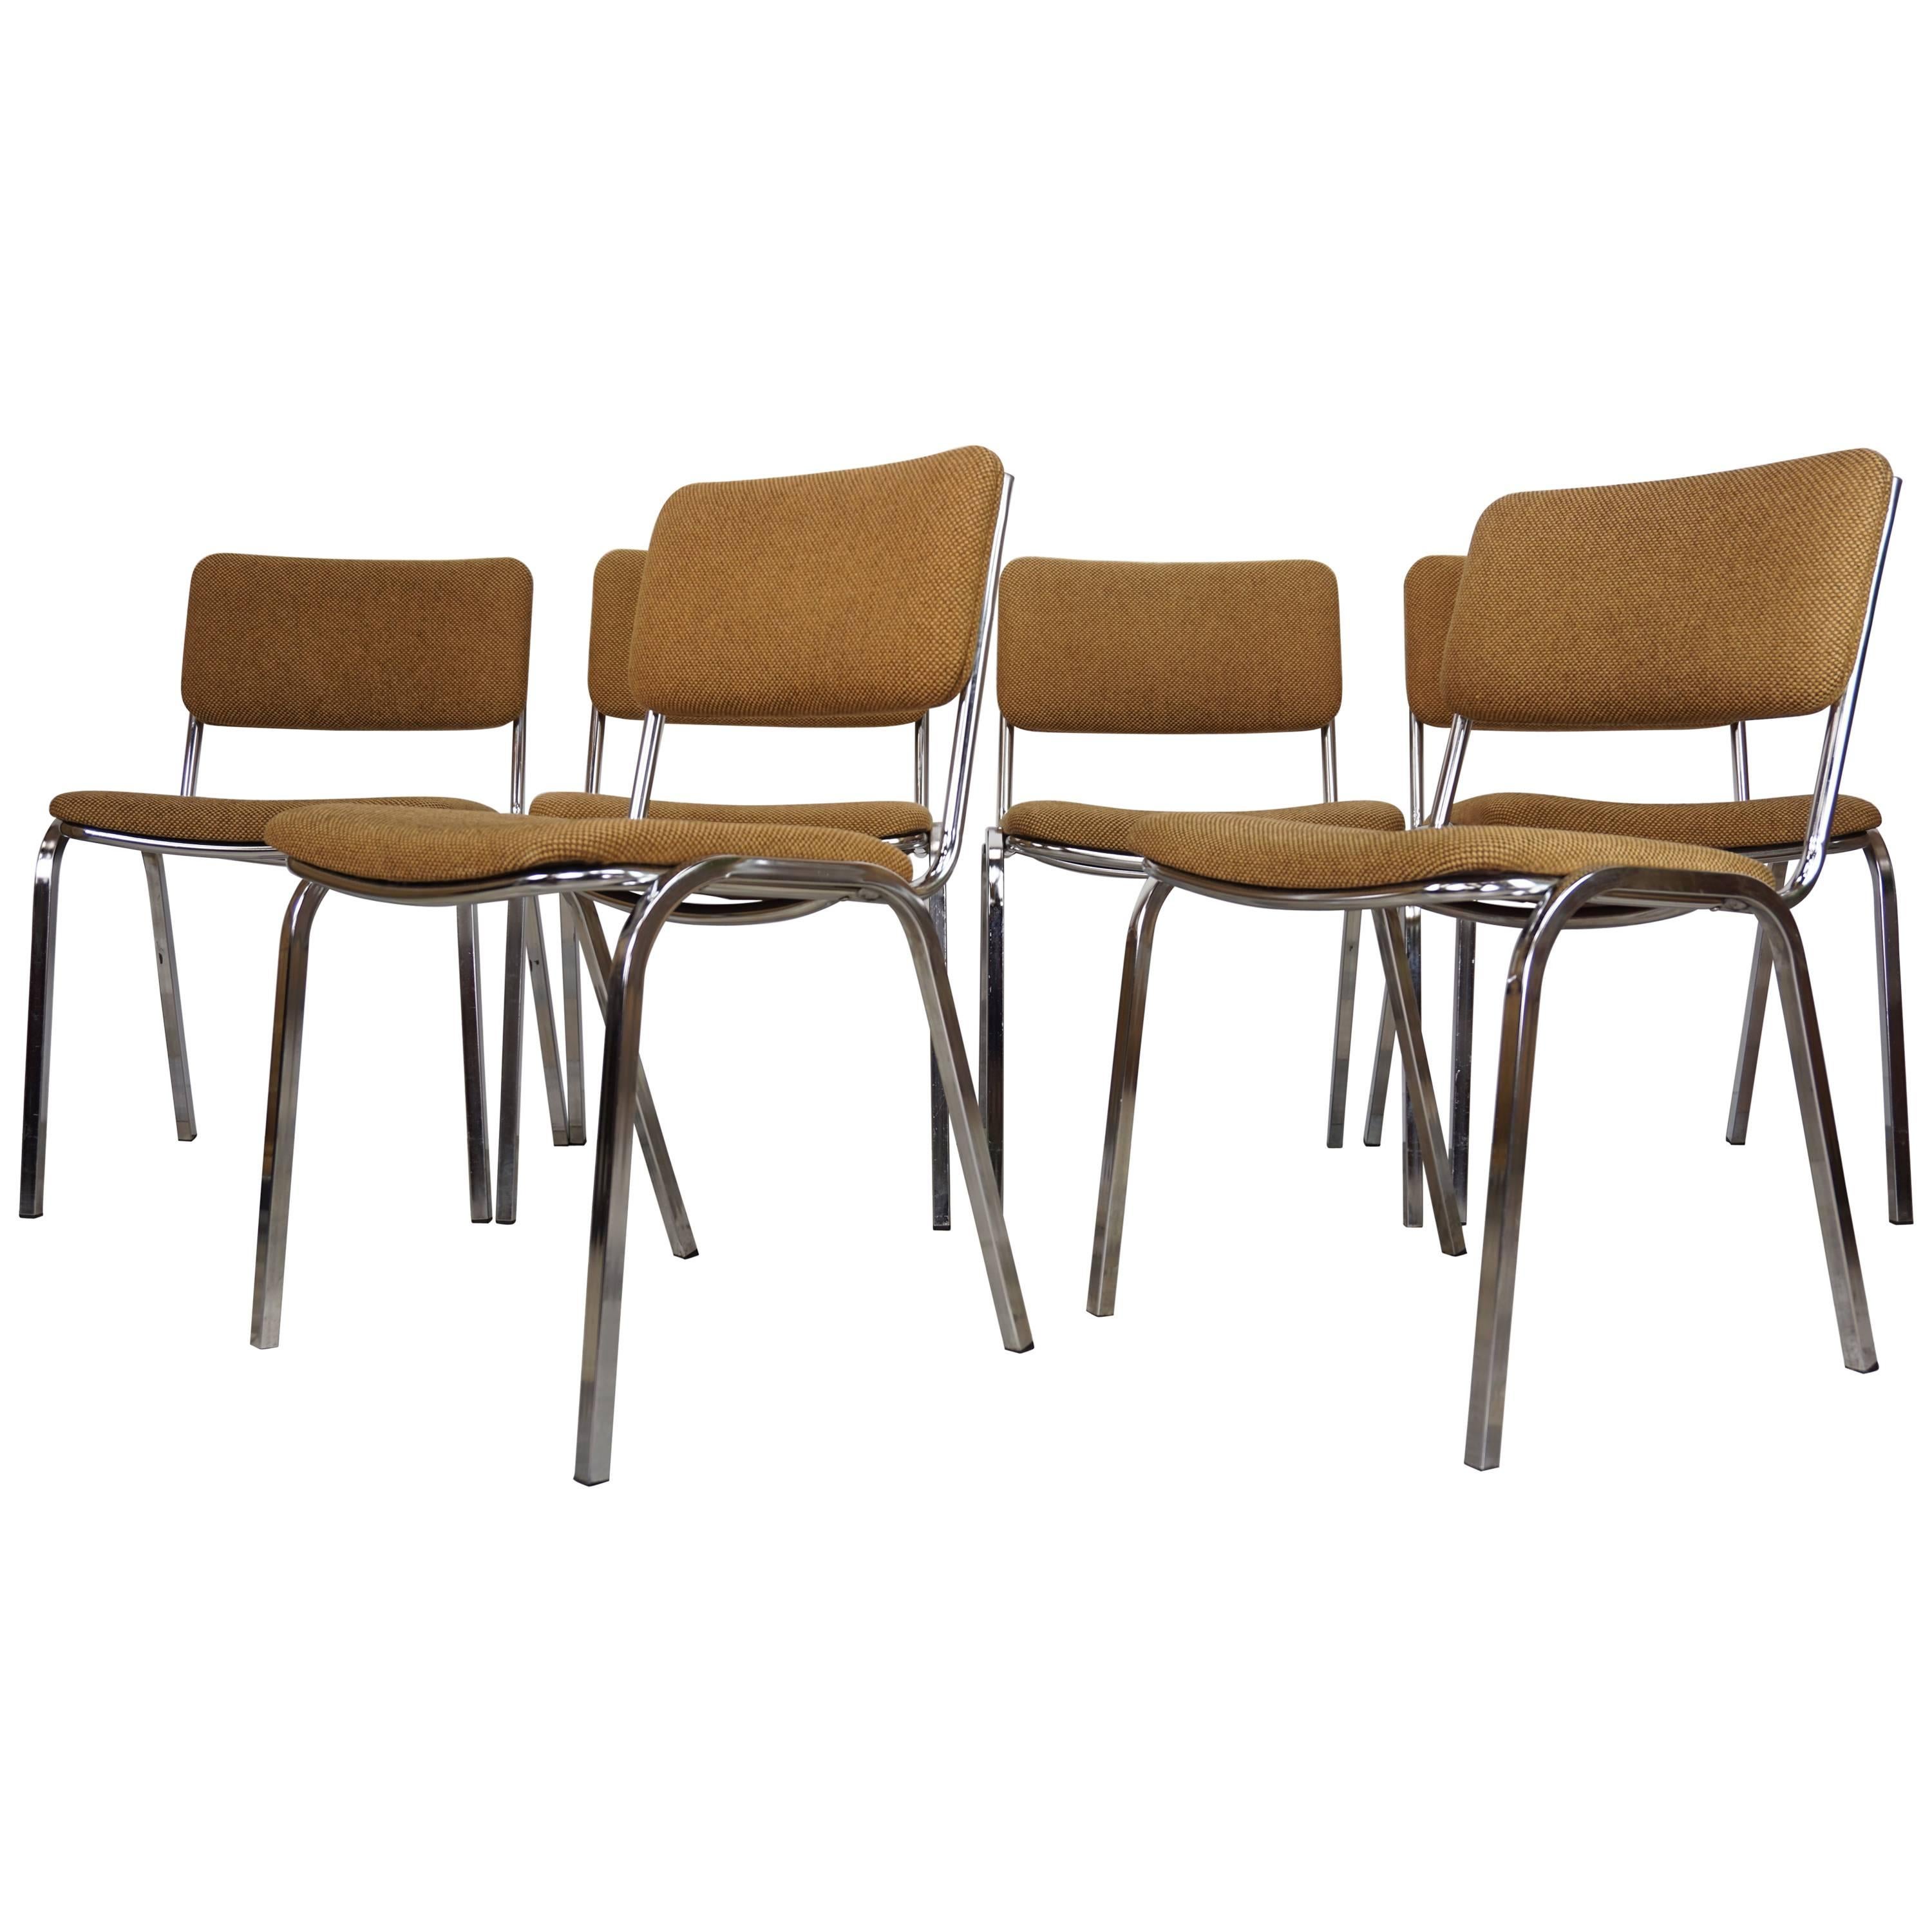 Chromed and Tweed Set of Six Chairs French Design from the 1960s